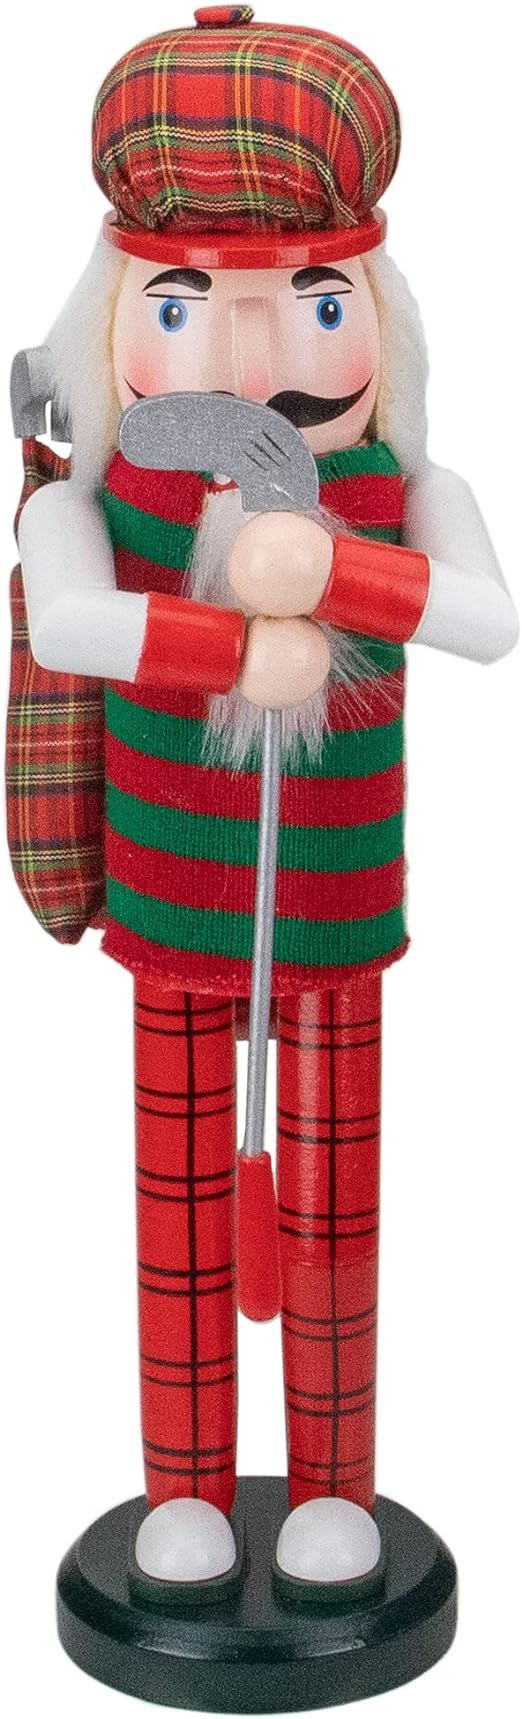 14" Red and Green Plaid Wooden Golfer Christmas Nutcracker | Amazon (US)